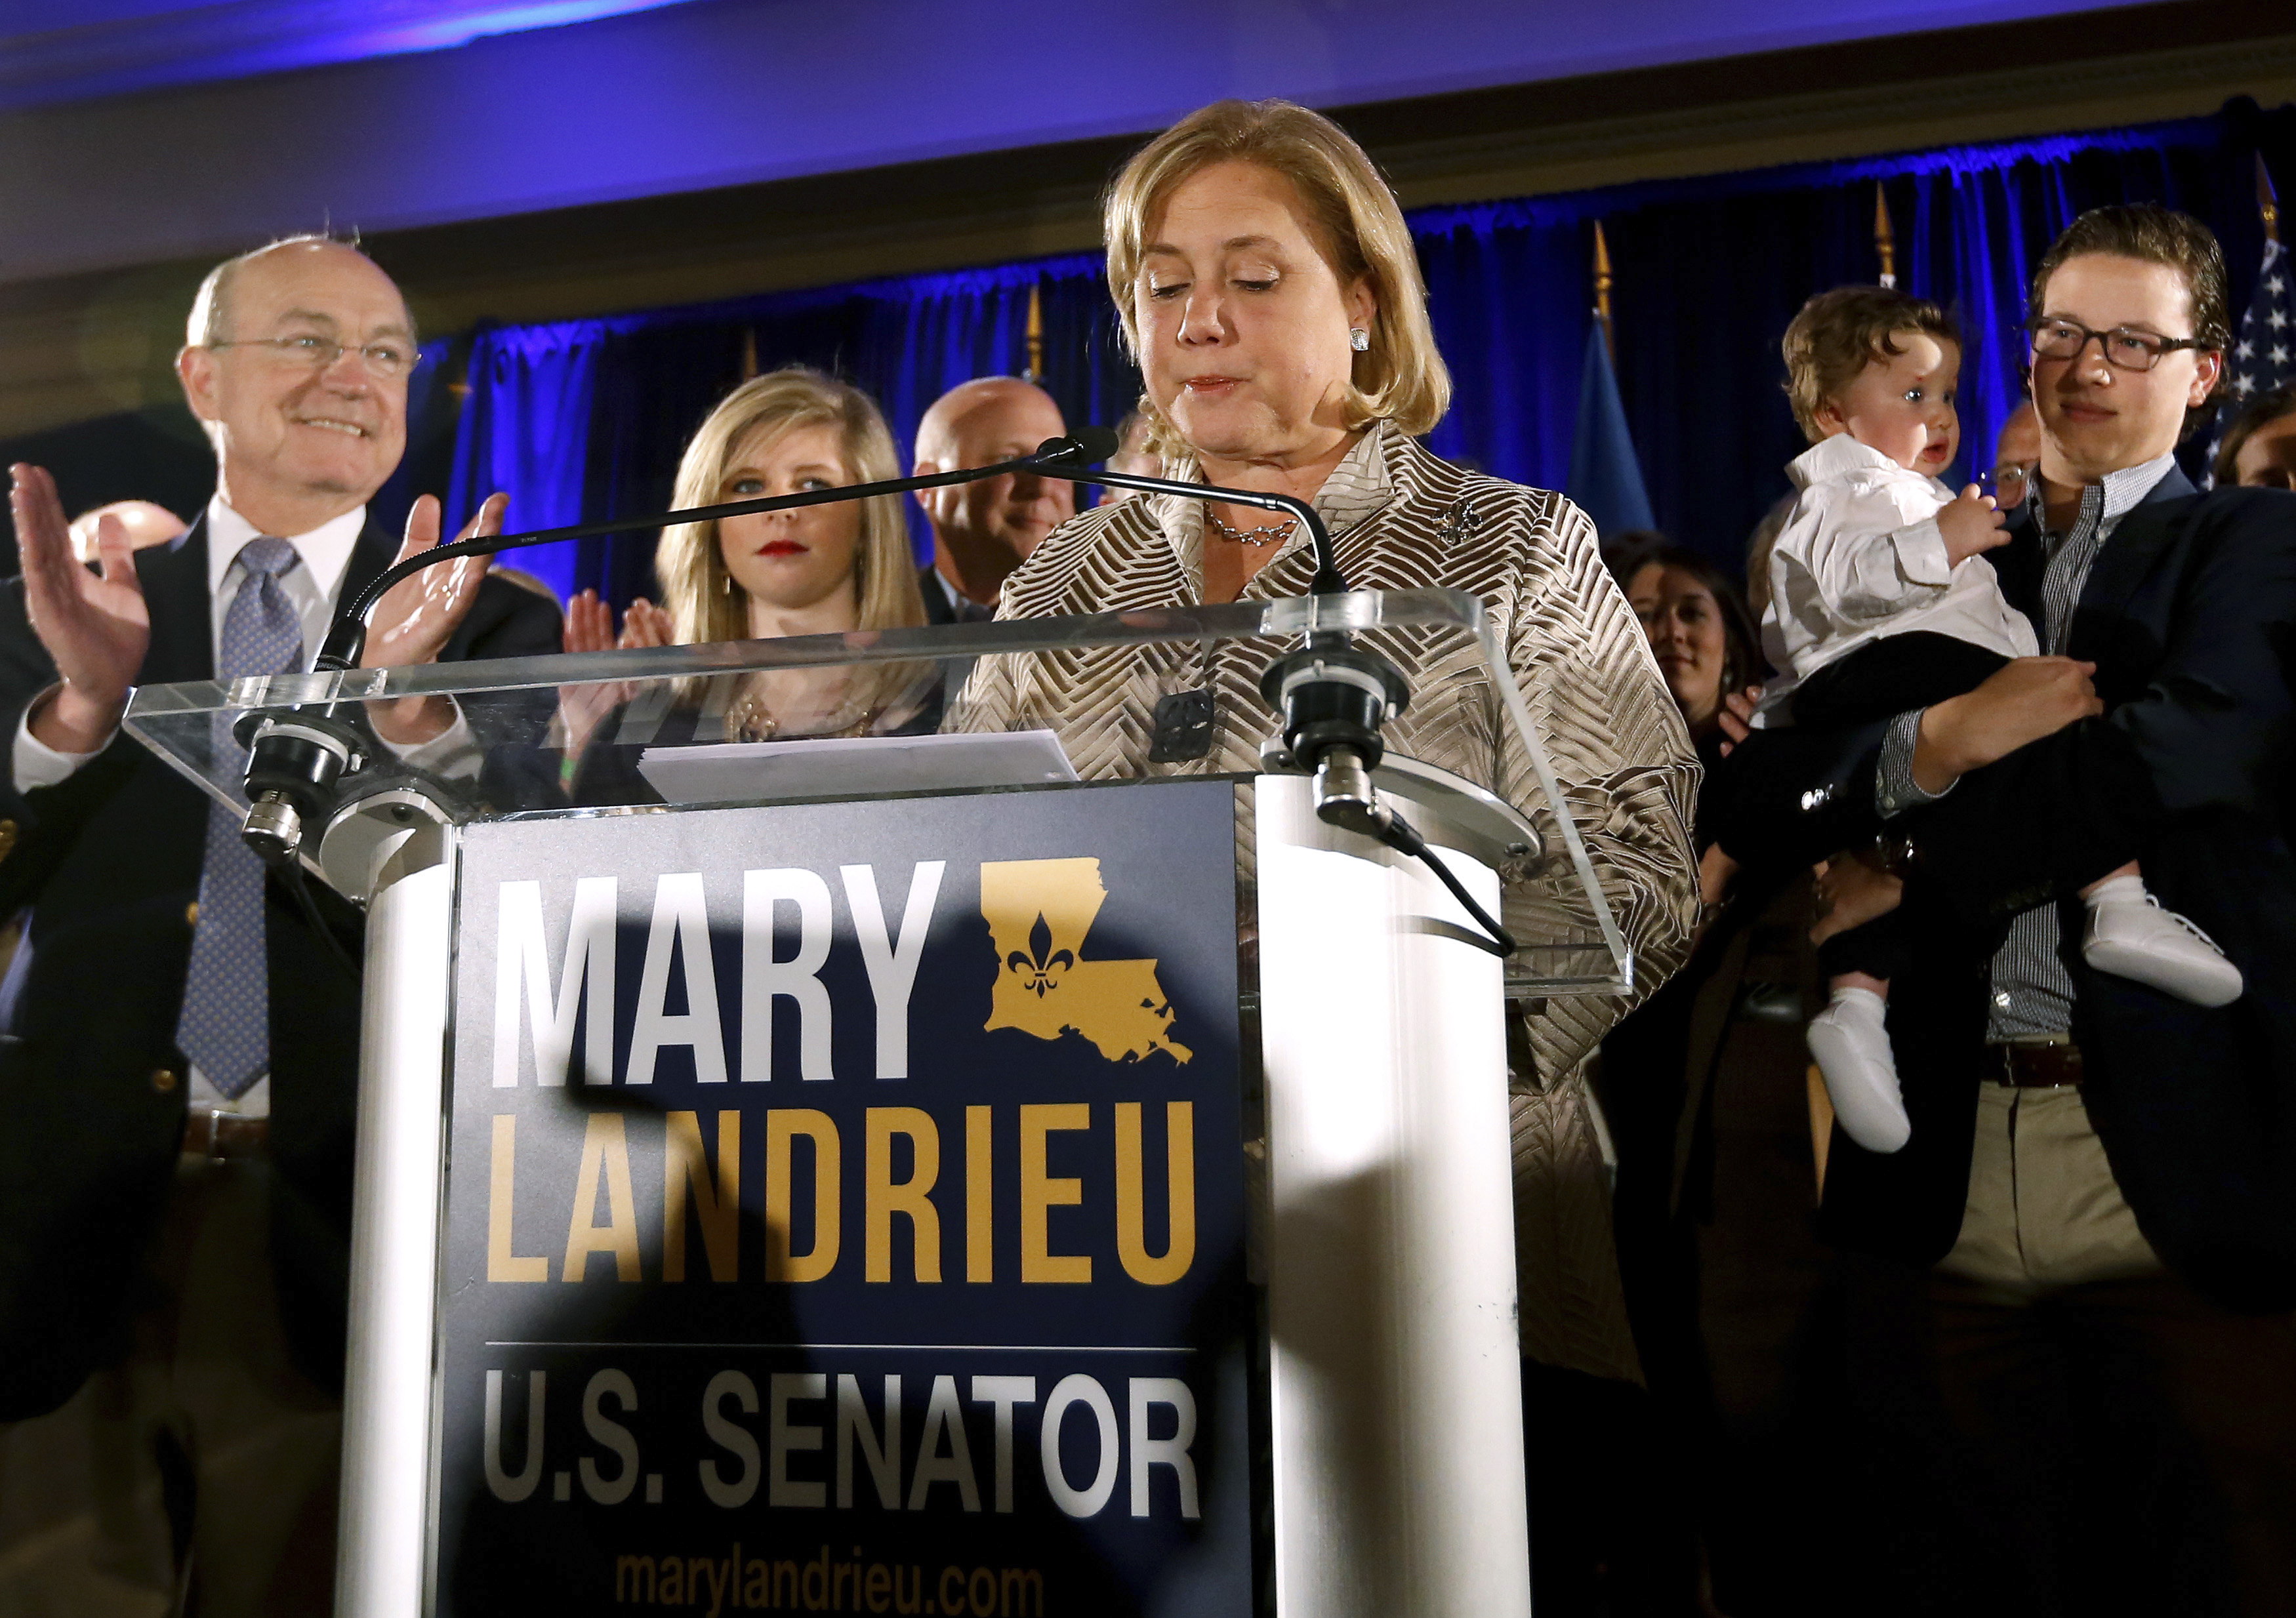 Democratic Senator Landrieu reacts while delivering a concession speech after the results of the U.S. Senate race in Louisiana during a runoff in New Orleans